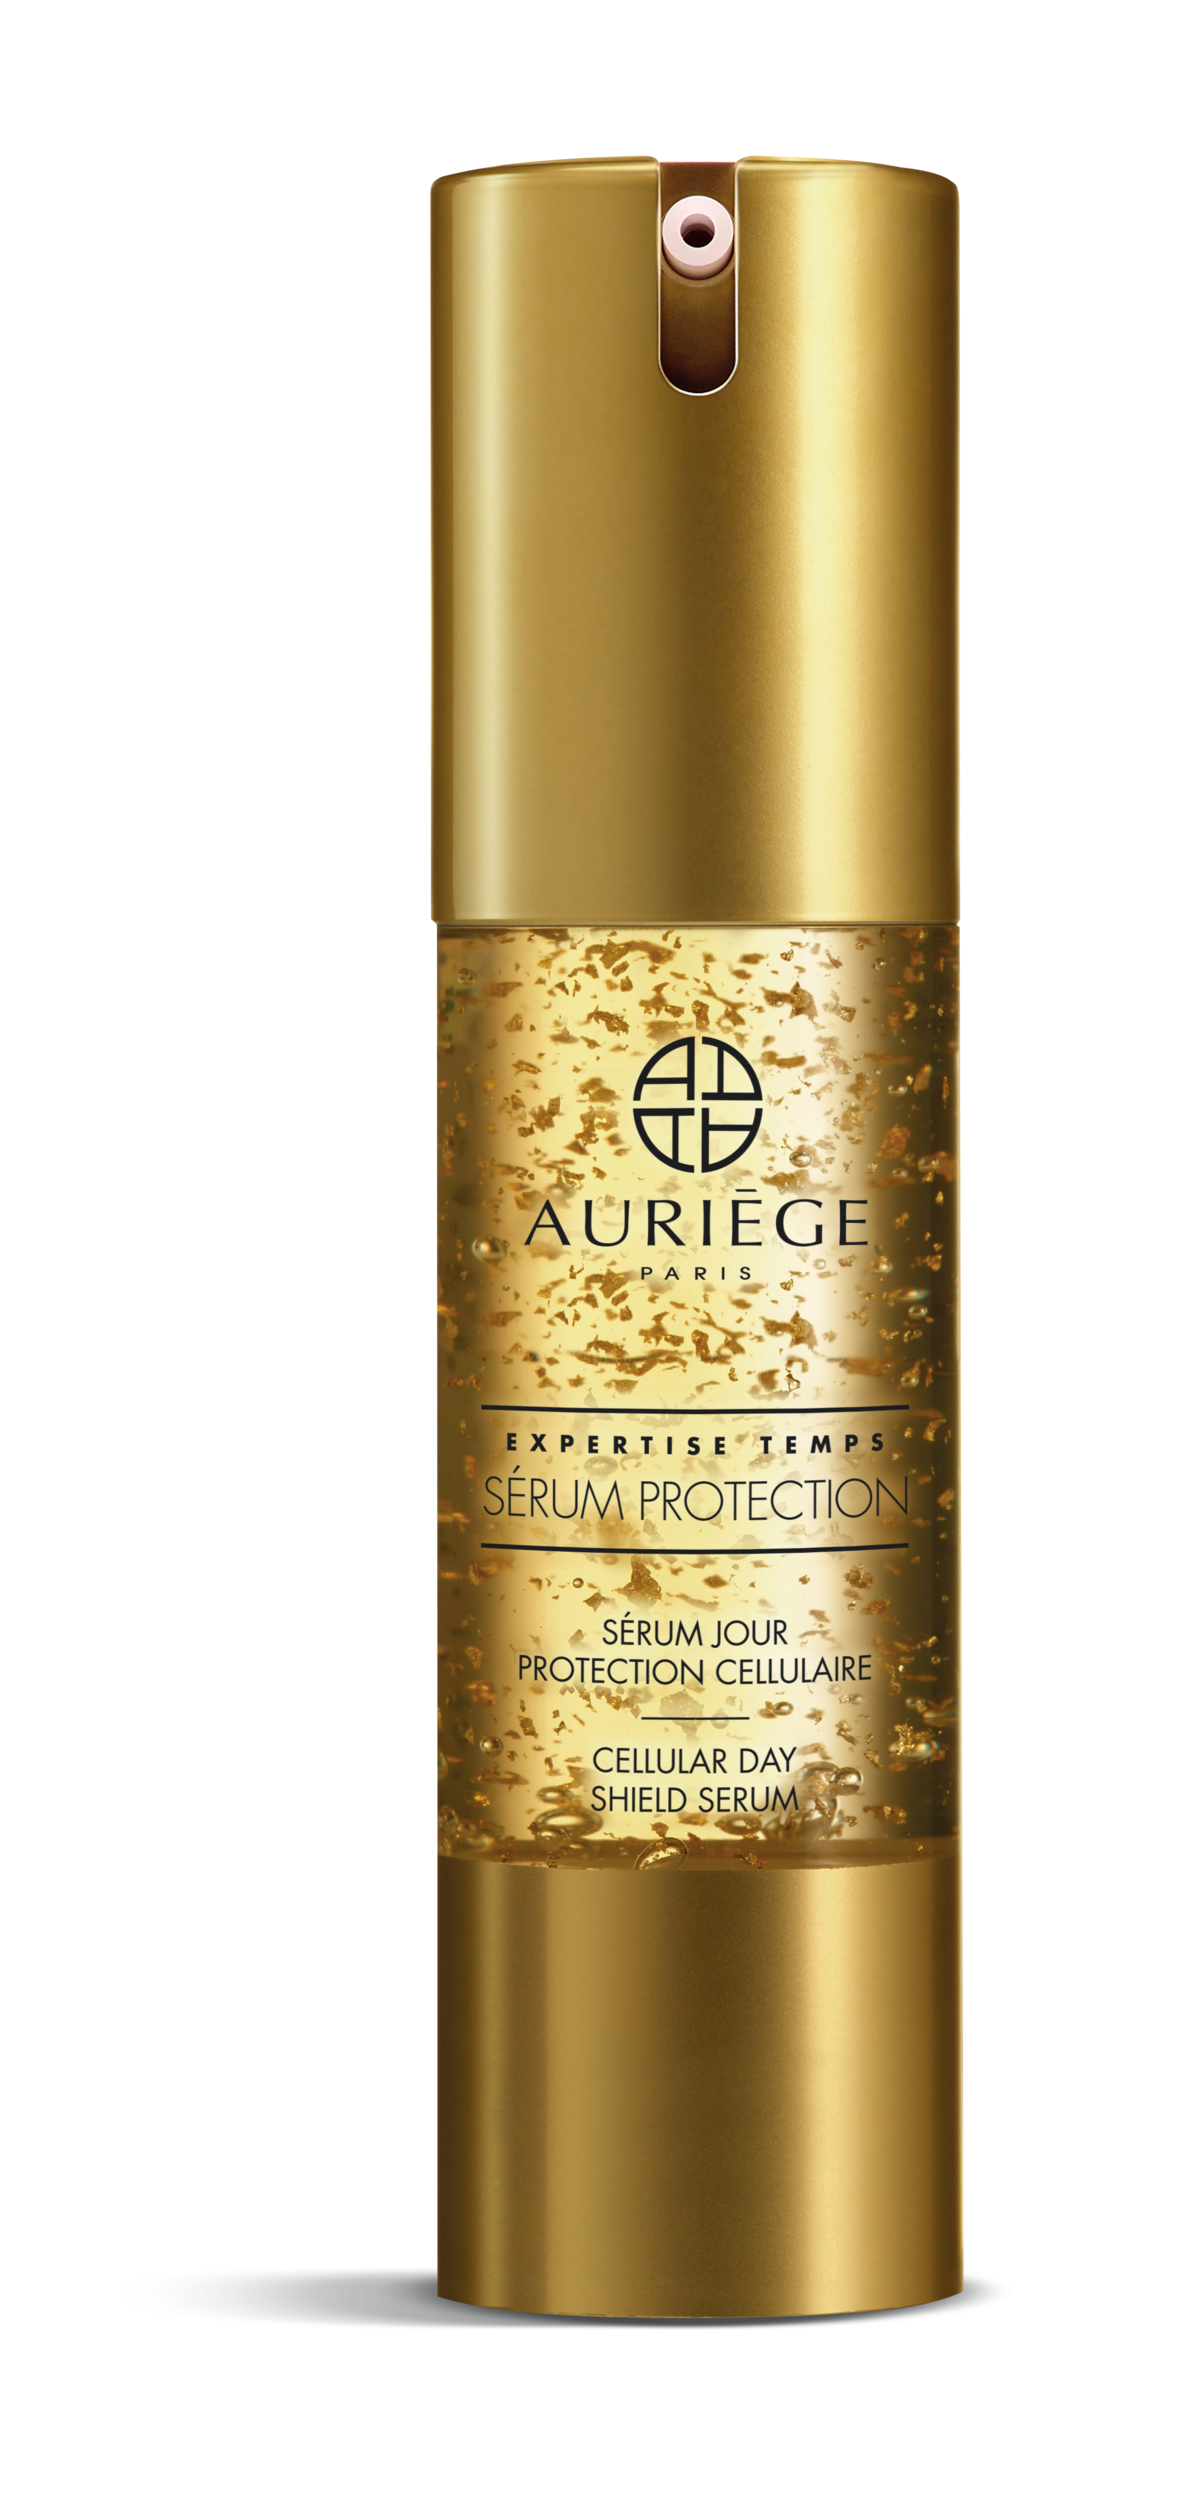 Serum Protection Cellulaire